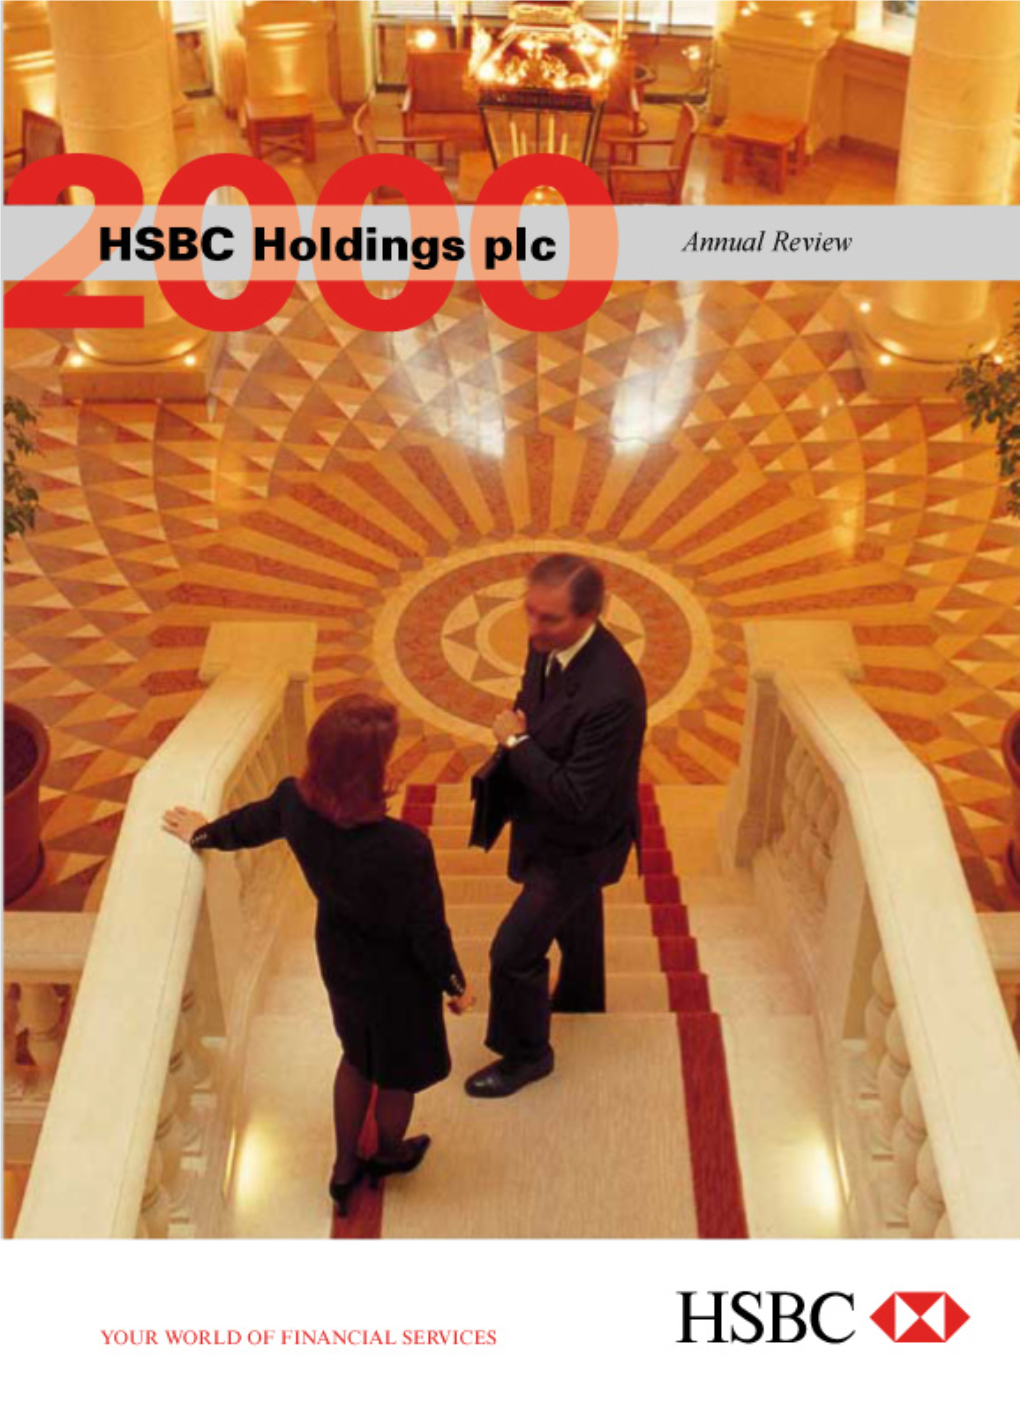 Annual Review Show Major International Network Comprises Some 6,500 Ofﬁces in Developments in the HSBC Group Last Year